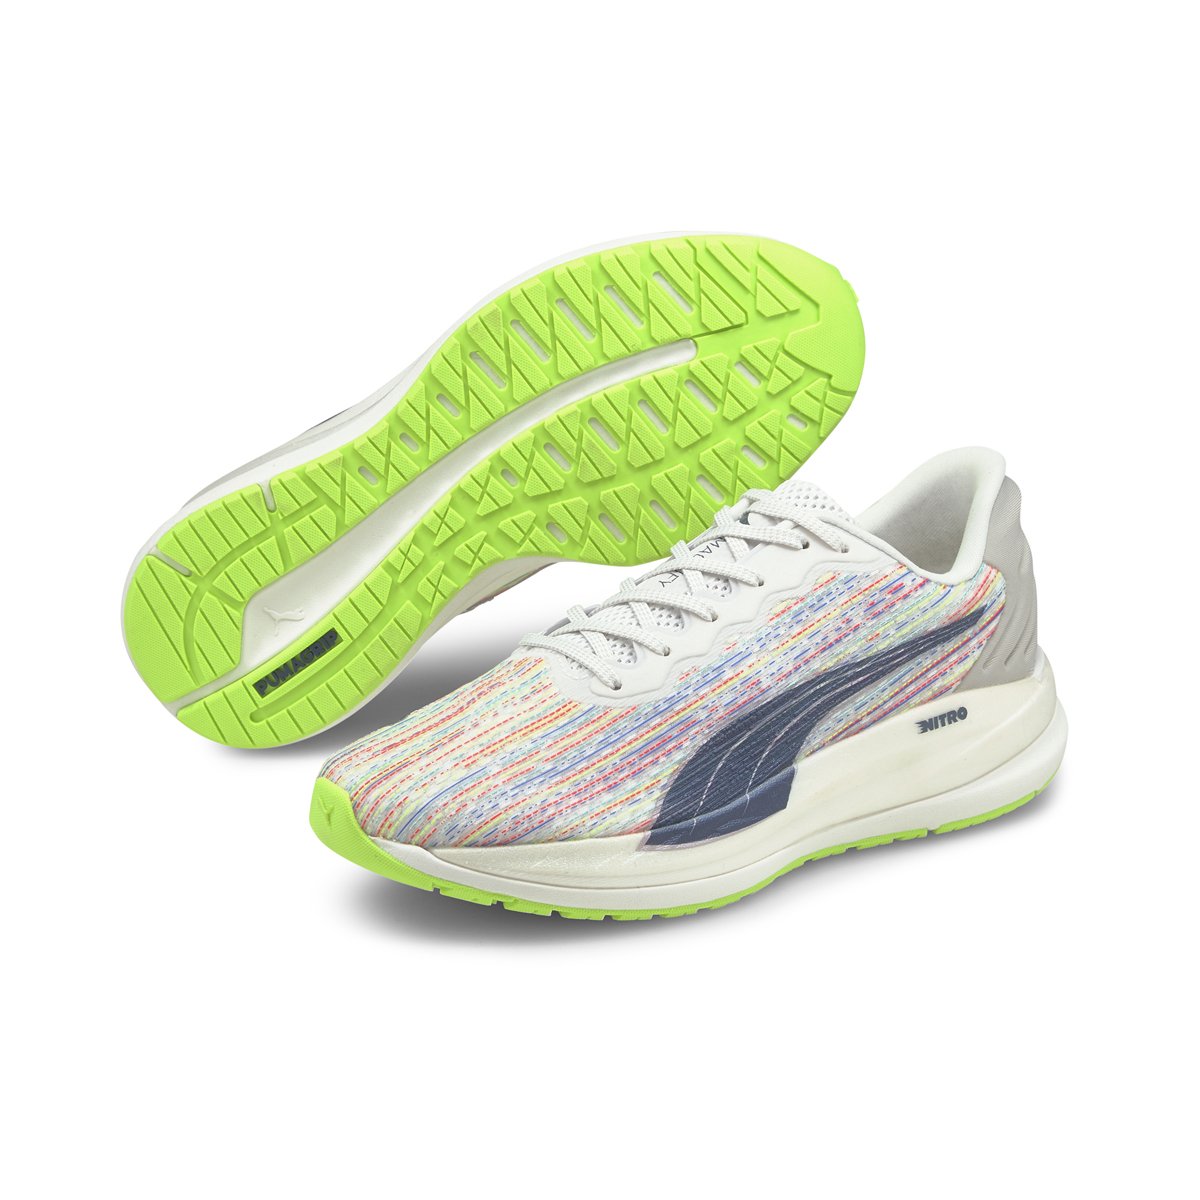 Puma Magnify Nitro Spectra Womens Running Shoes